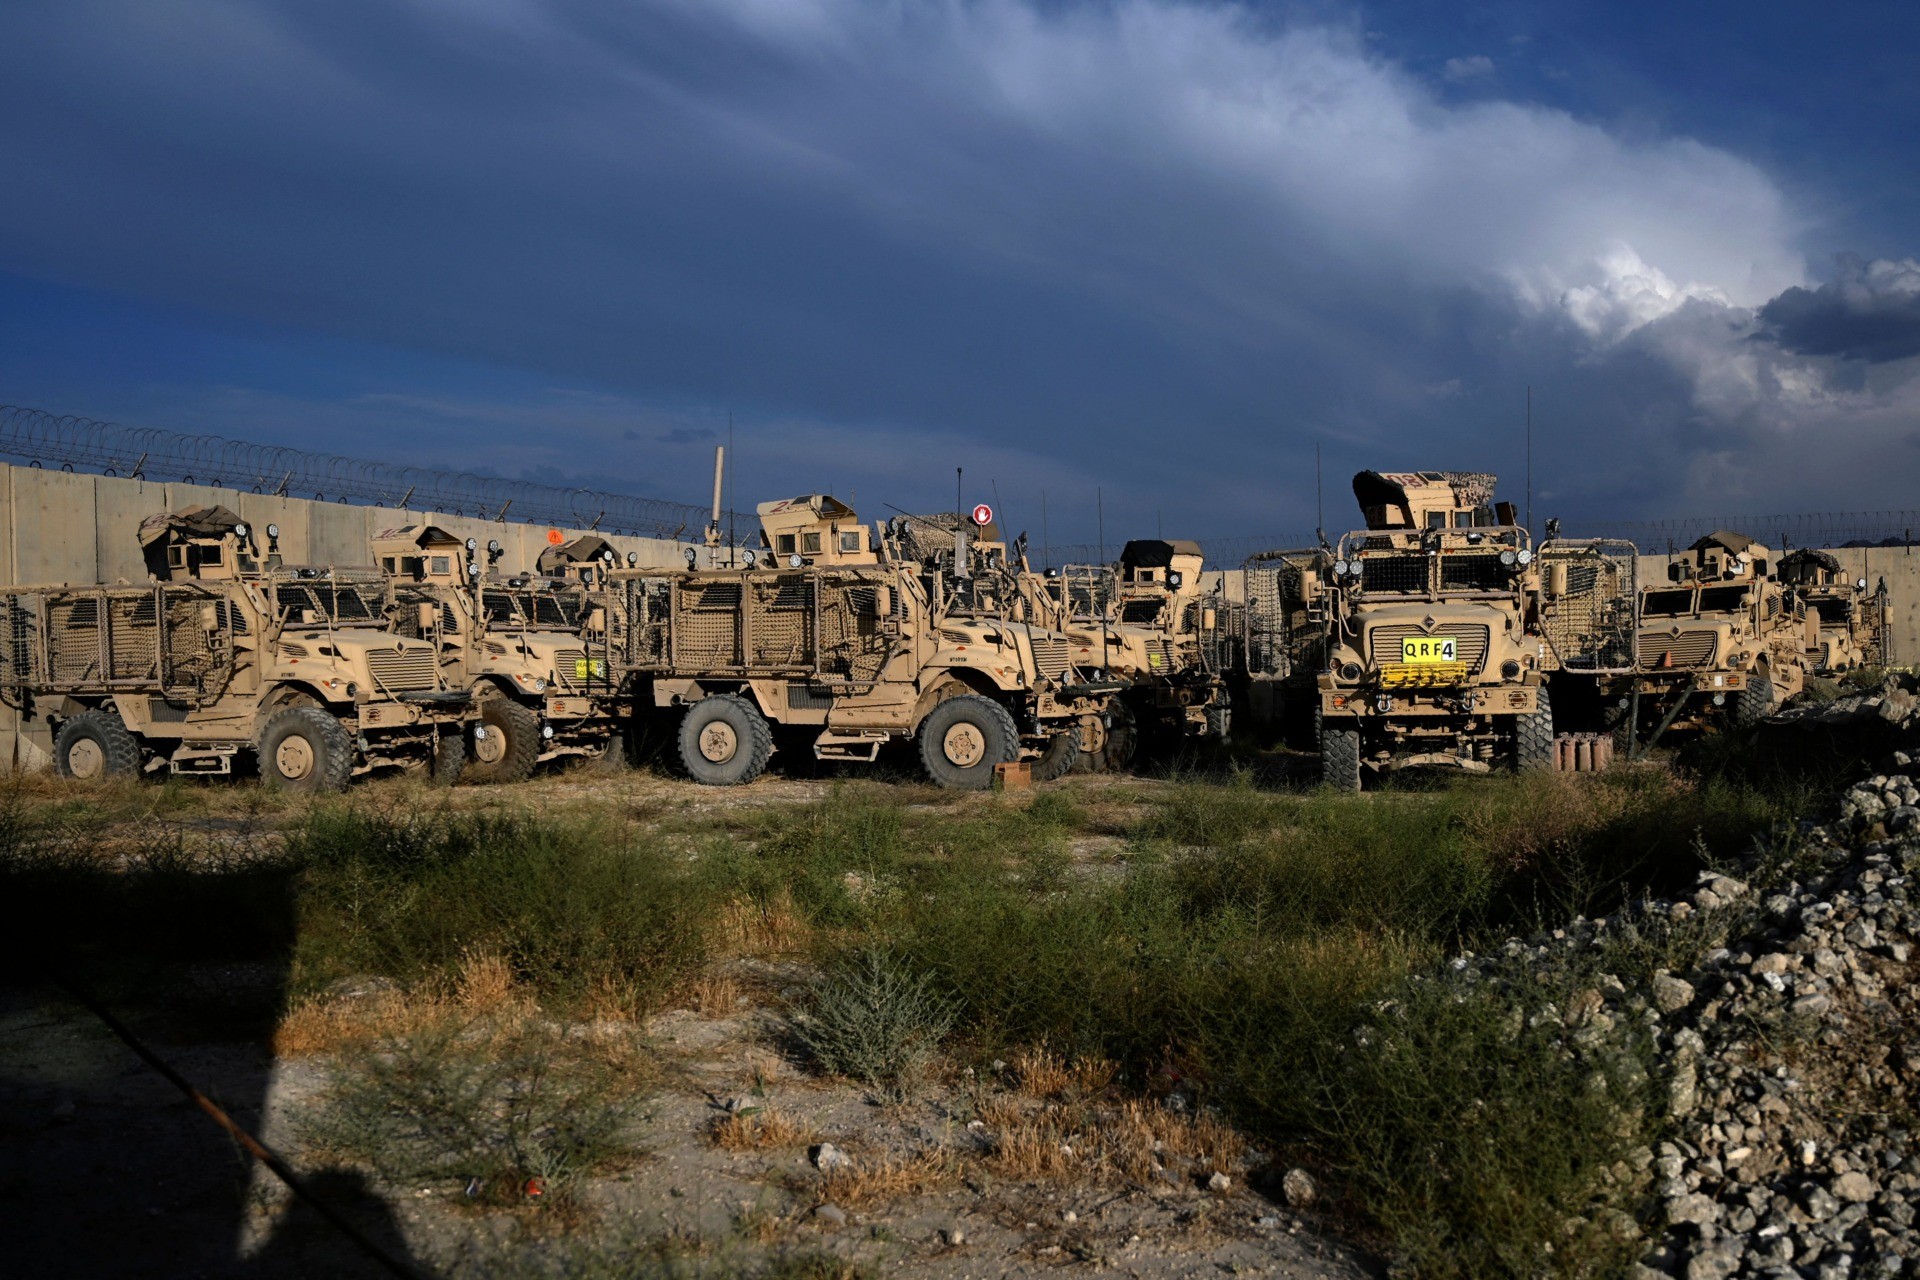 TOPSHOT - Mine resistant ambush protection vehicles (MRAP) are seen inside the Bagram US air base after all US and NATO troops left,some 70 Km north of Kabul on July 5, 2021. (Photo by WAKIL KOHSAR / AFP) (Photo by WAKIL KOHSAR/AFP via Getty Images)